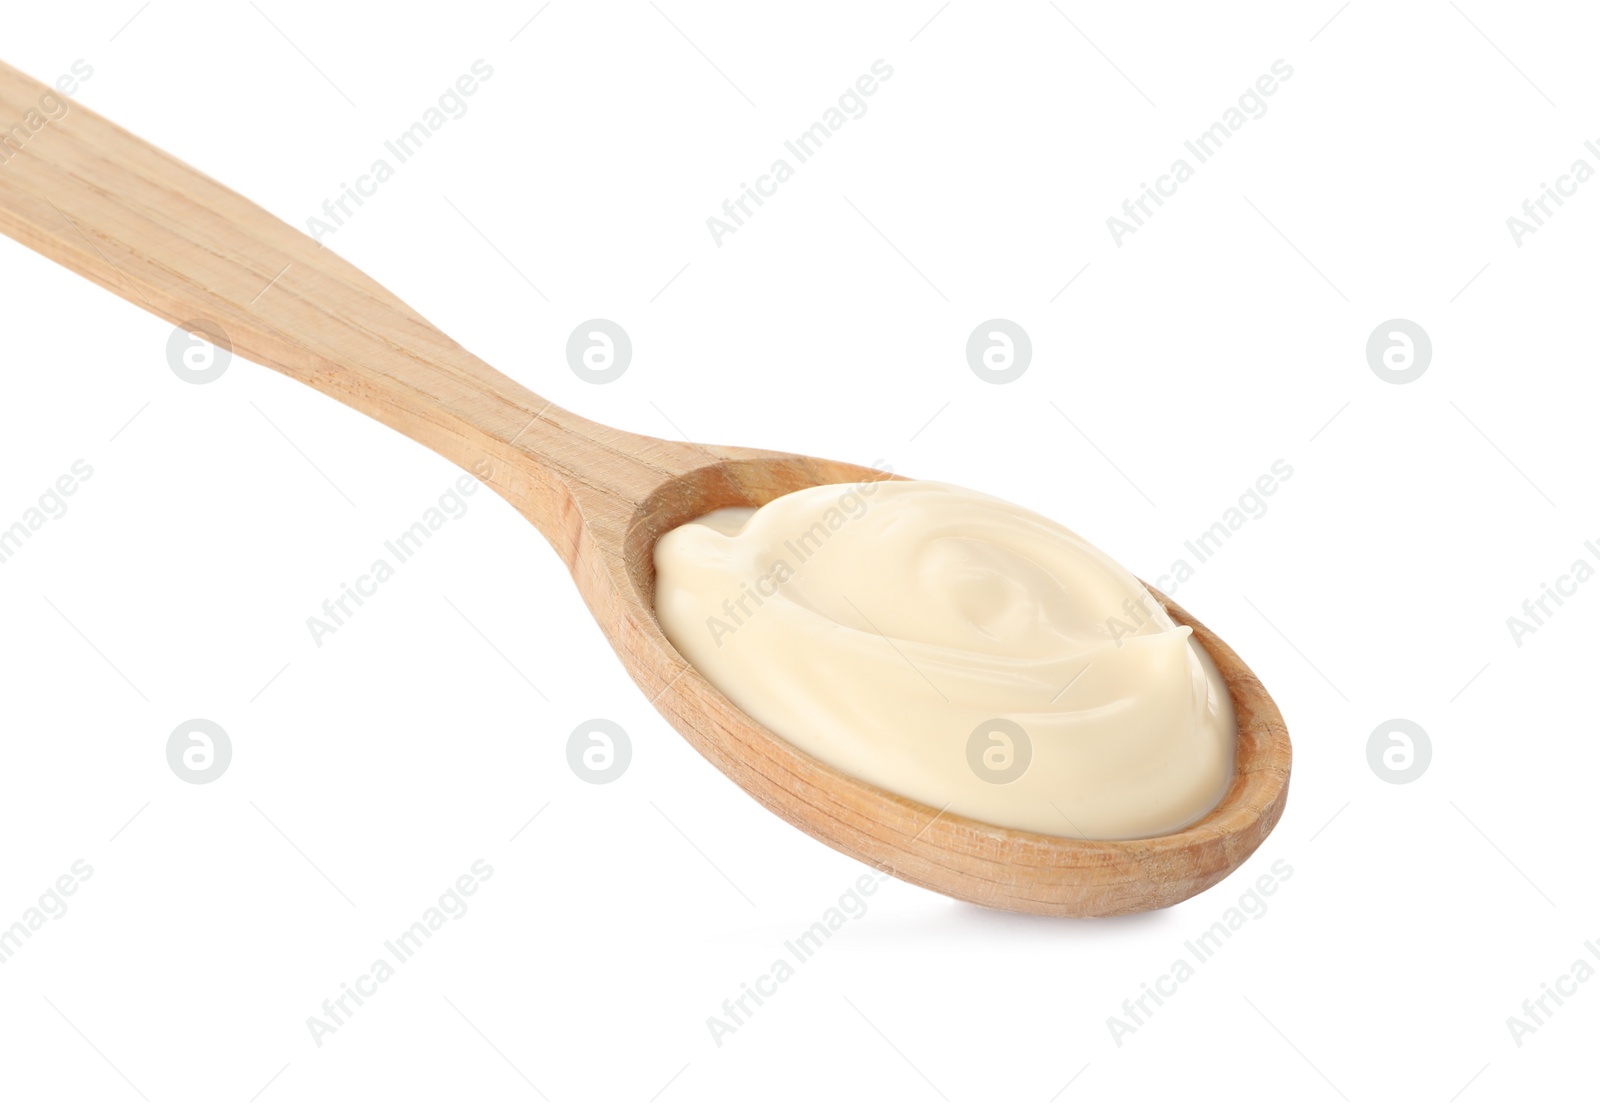 Photo of Wooden spoon with tasty mayonnaise isolated on white